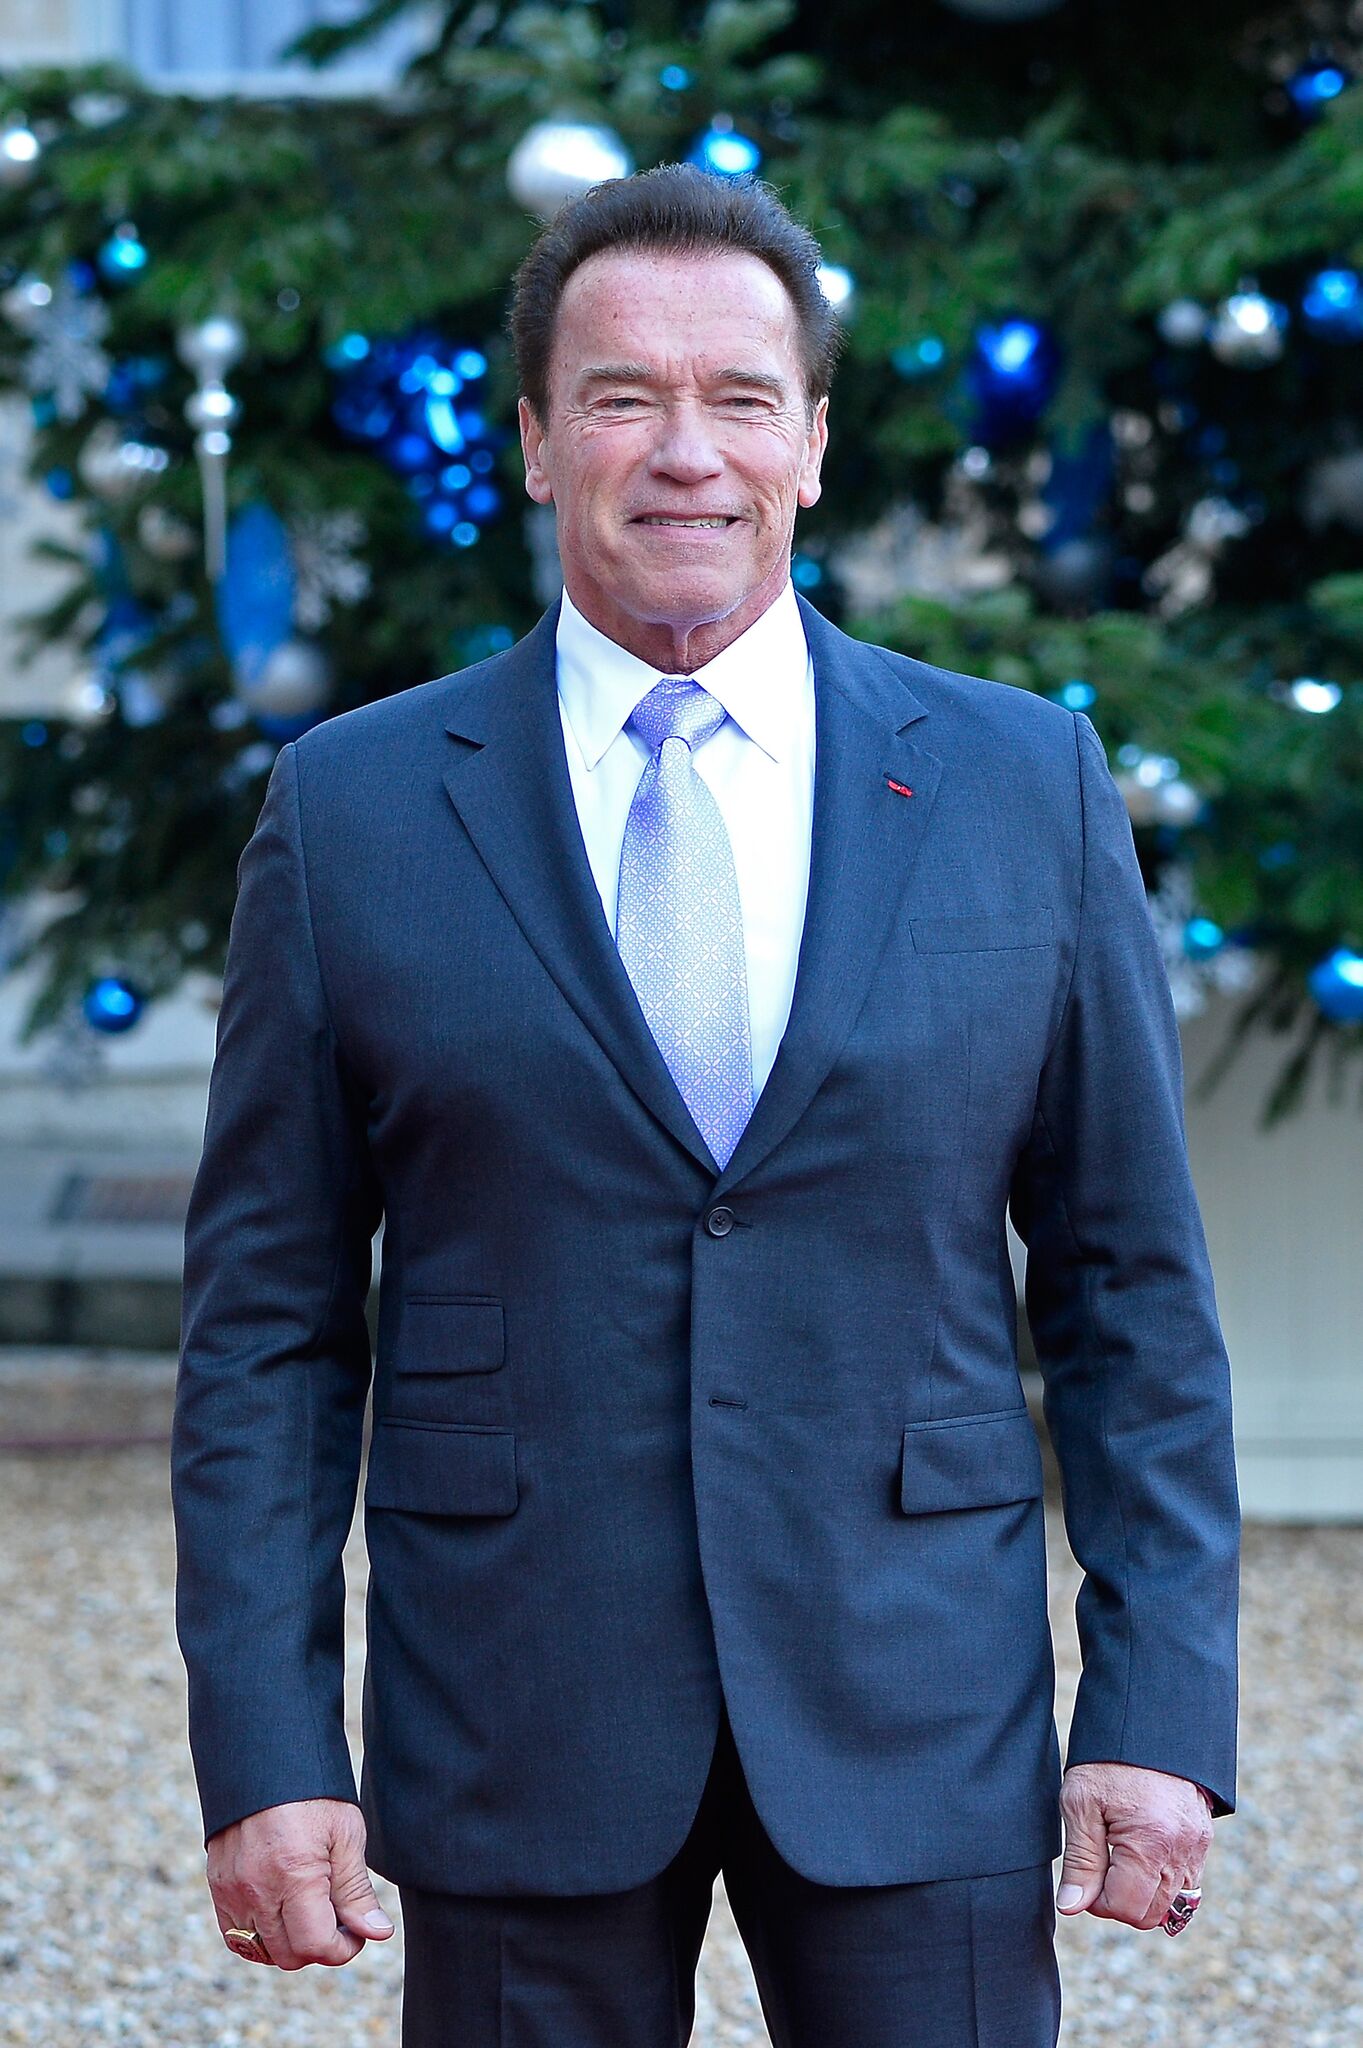 Arnold Schwarzenegger arrives for a meeting with French President Emmanuel Macron | Getty Images